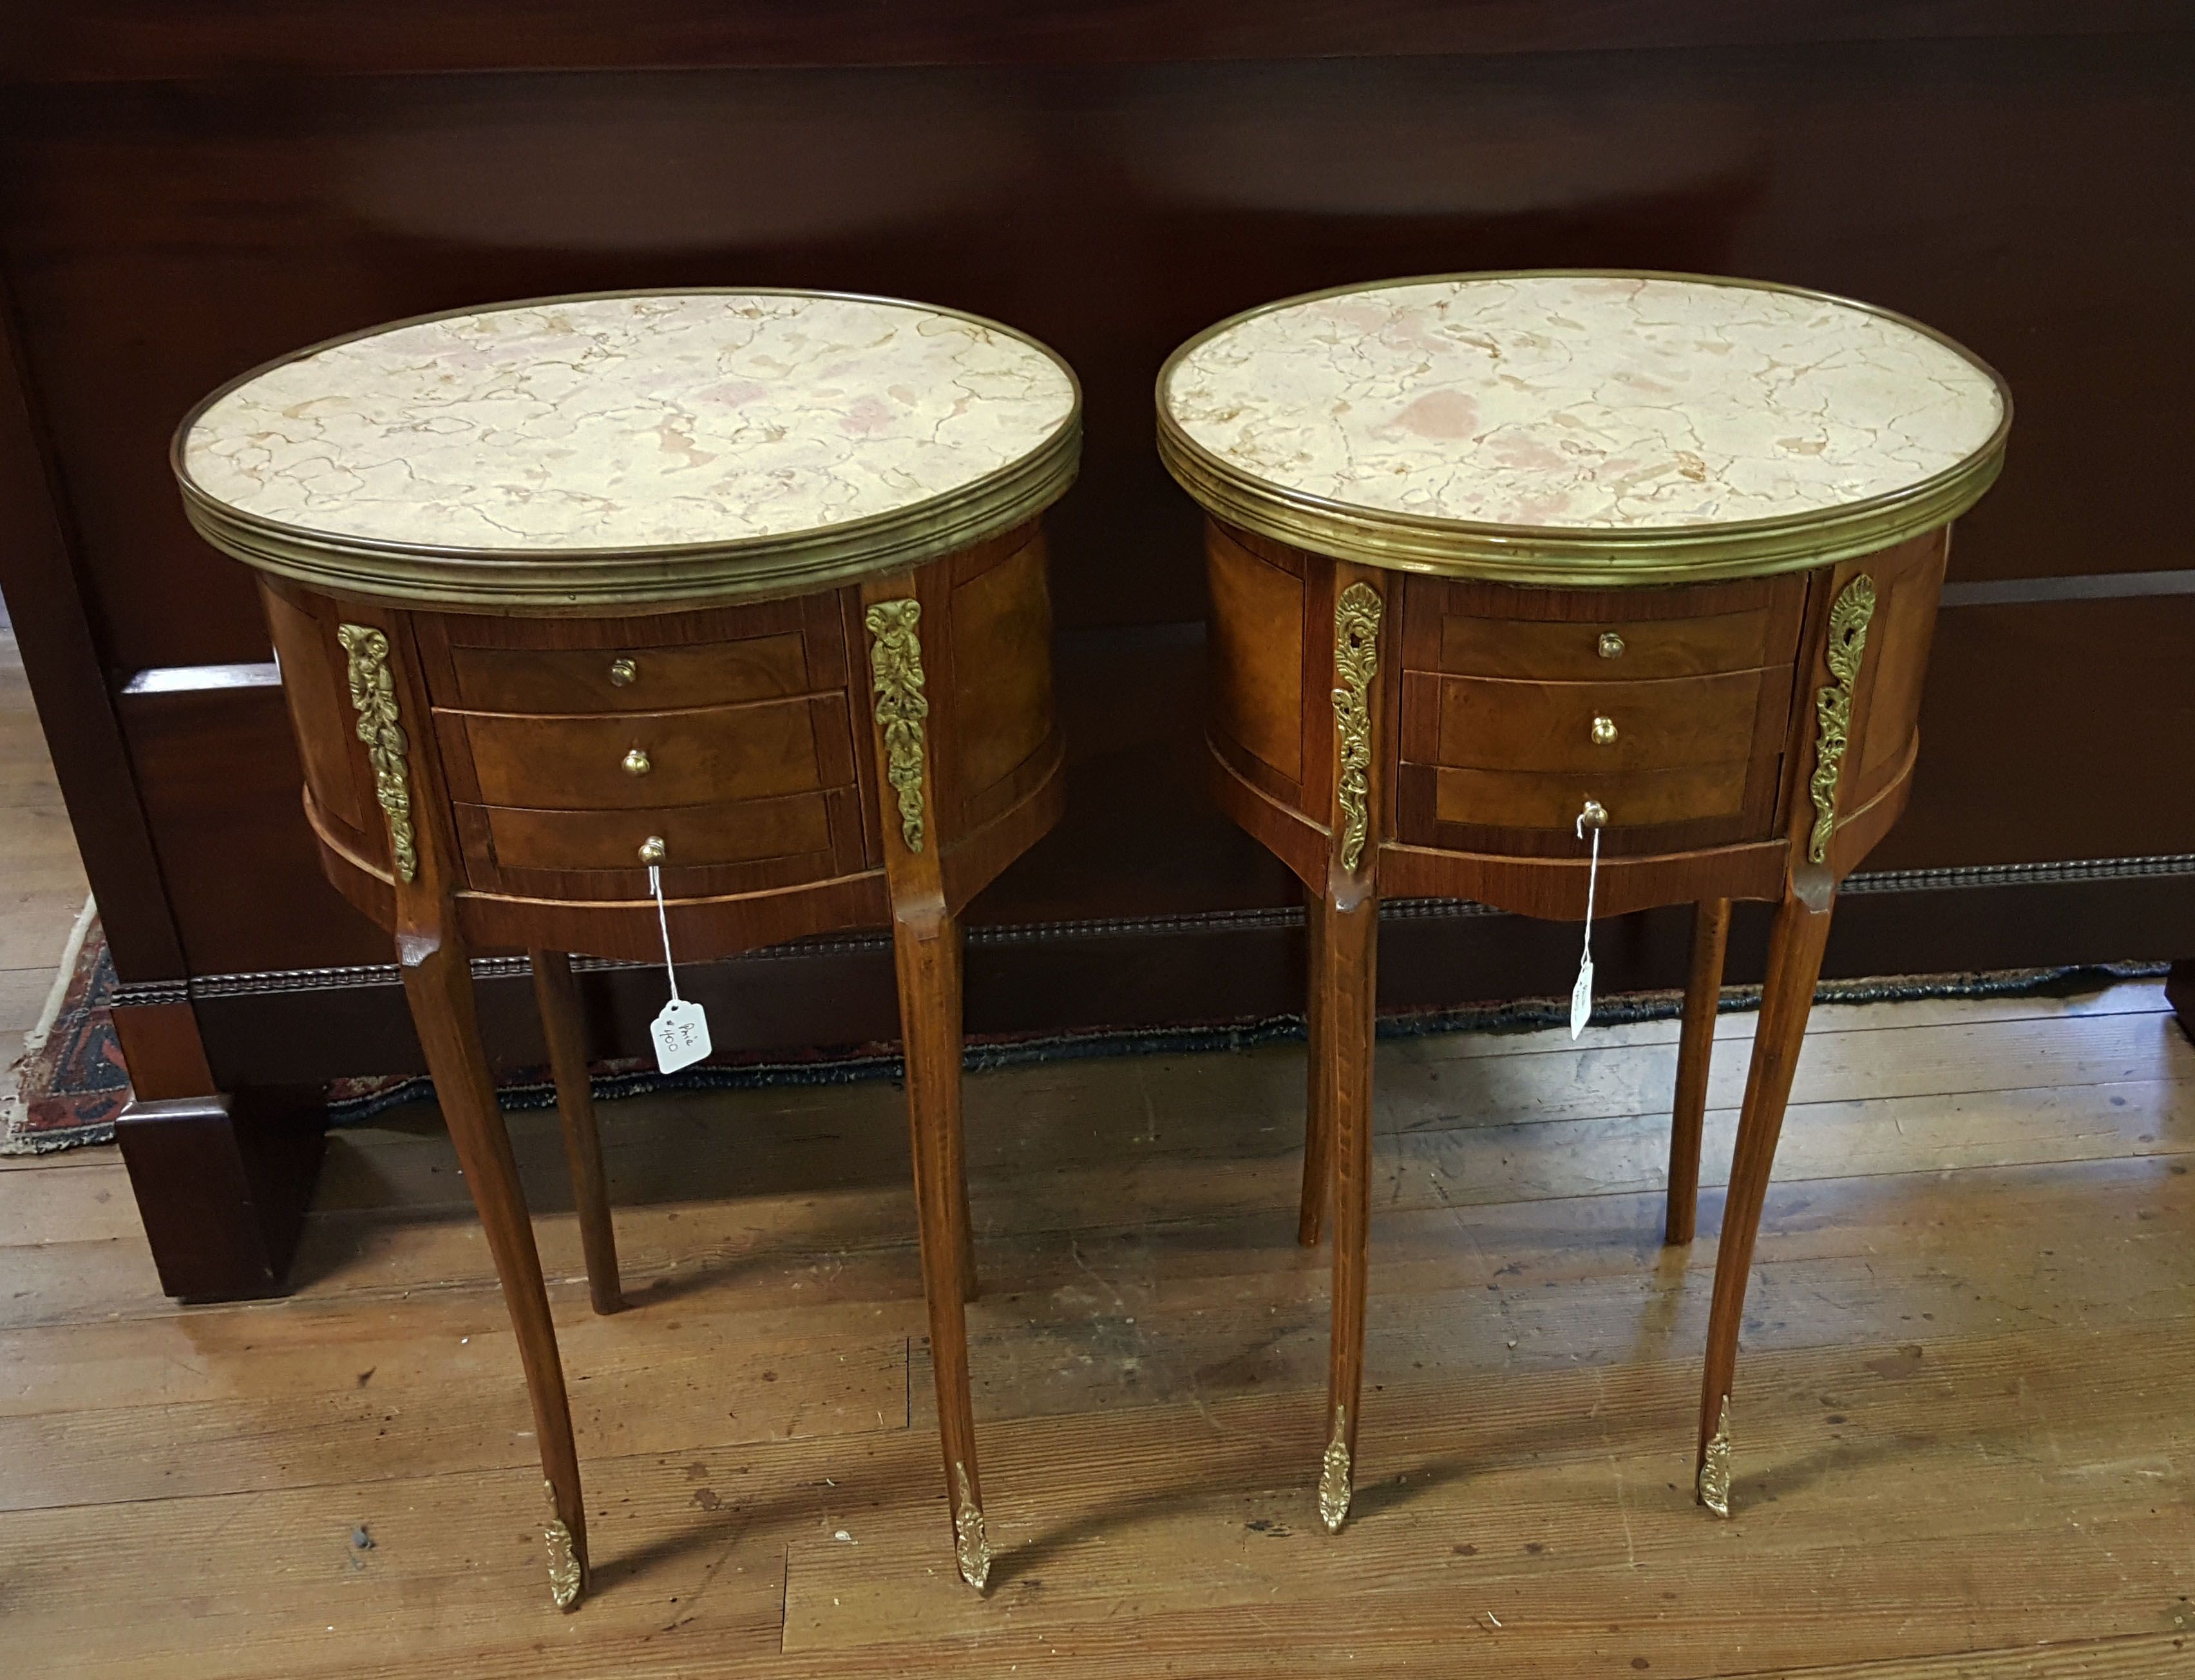 PAIR SIDE TABLES